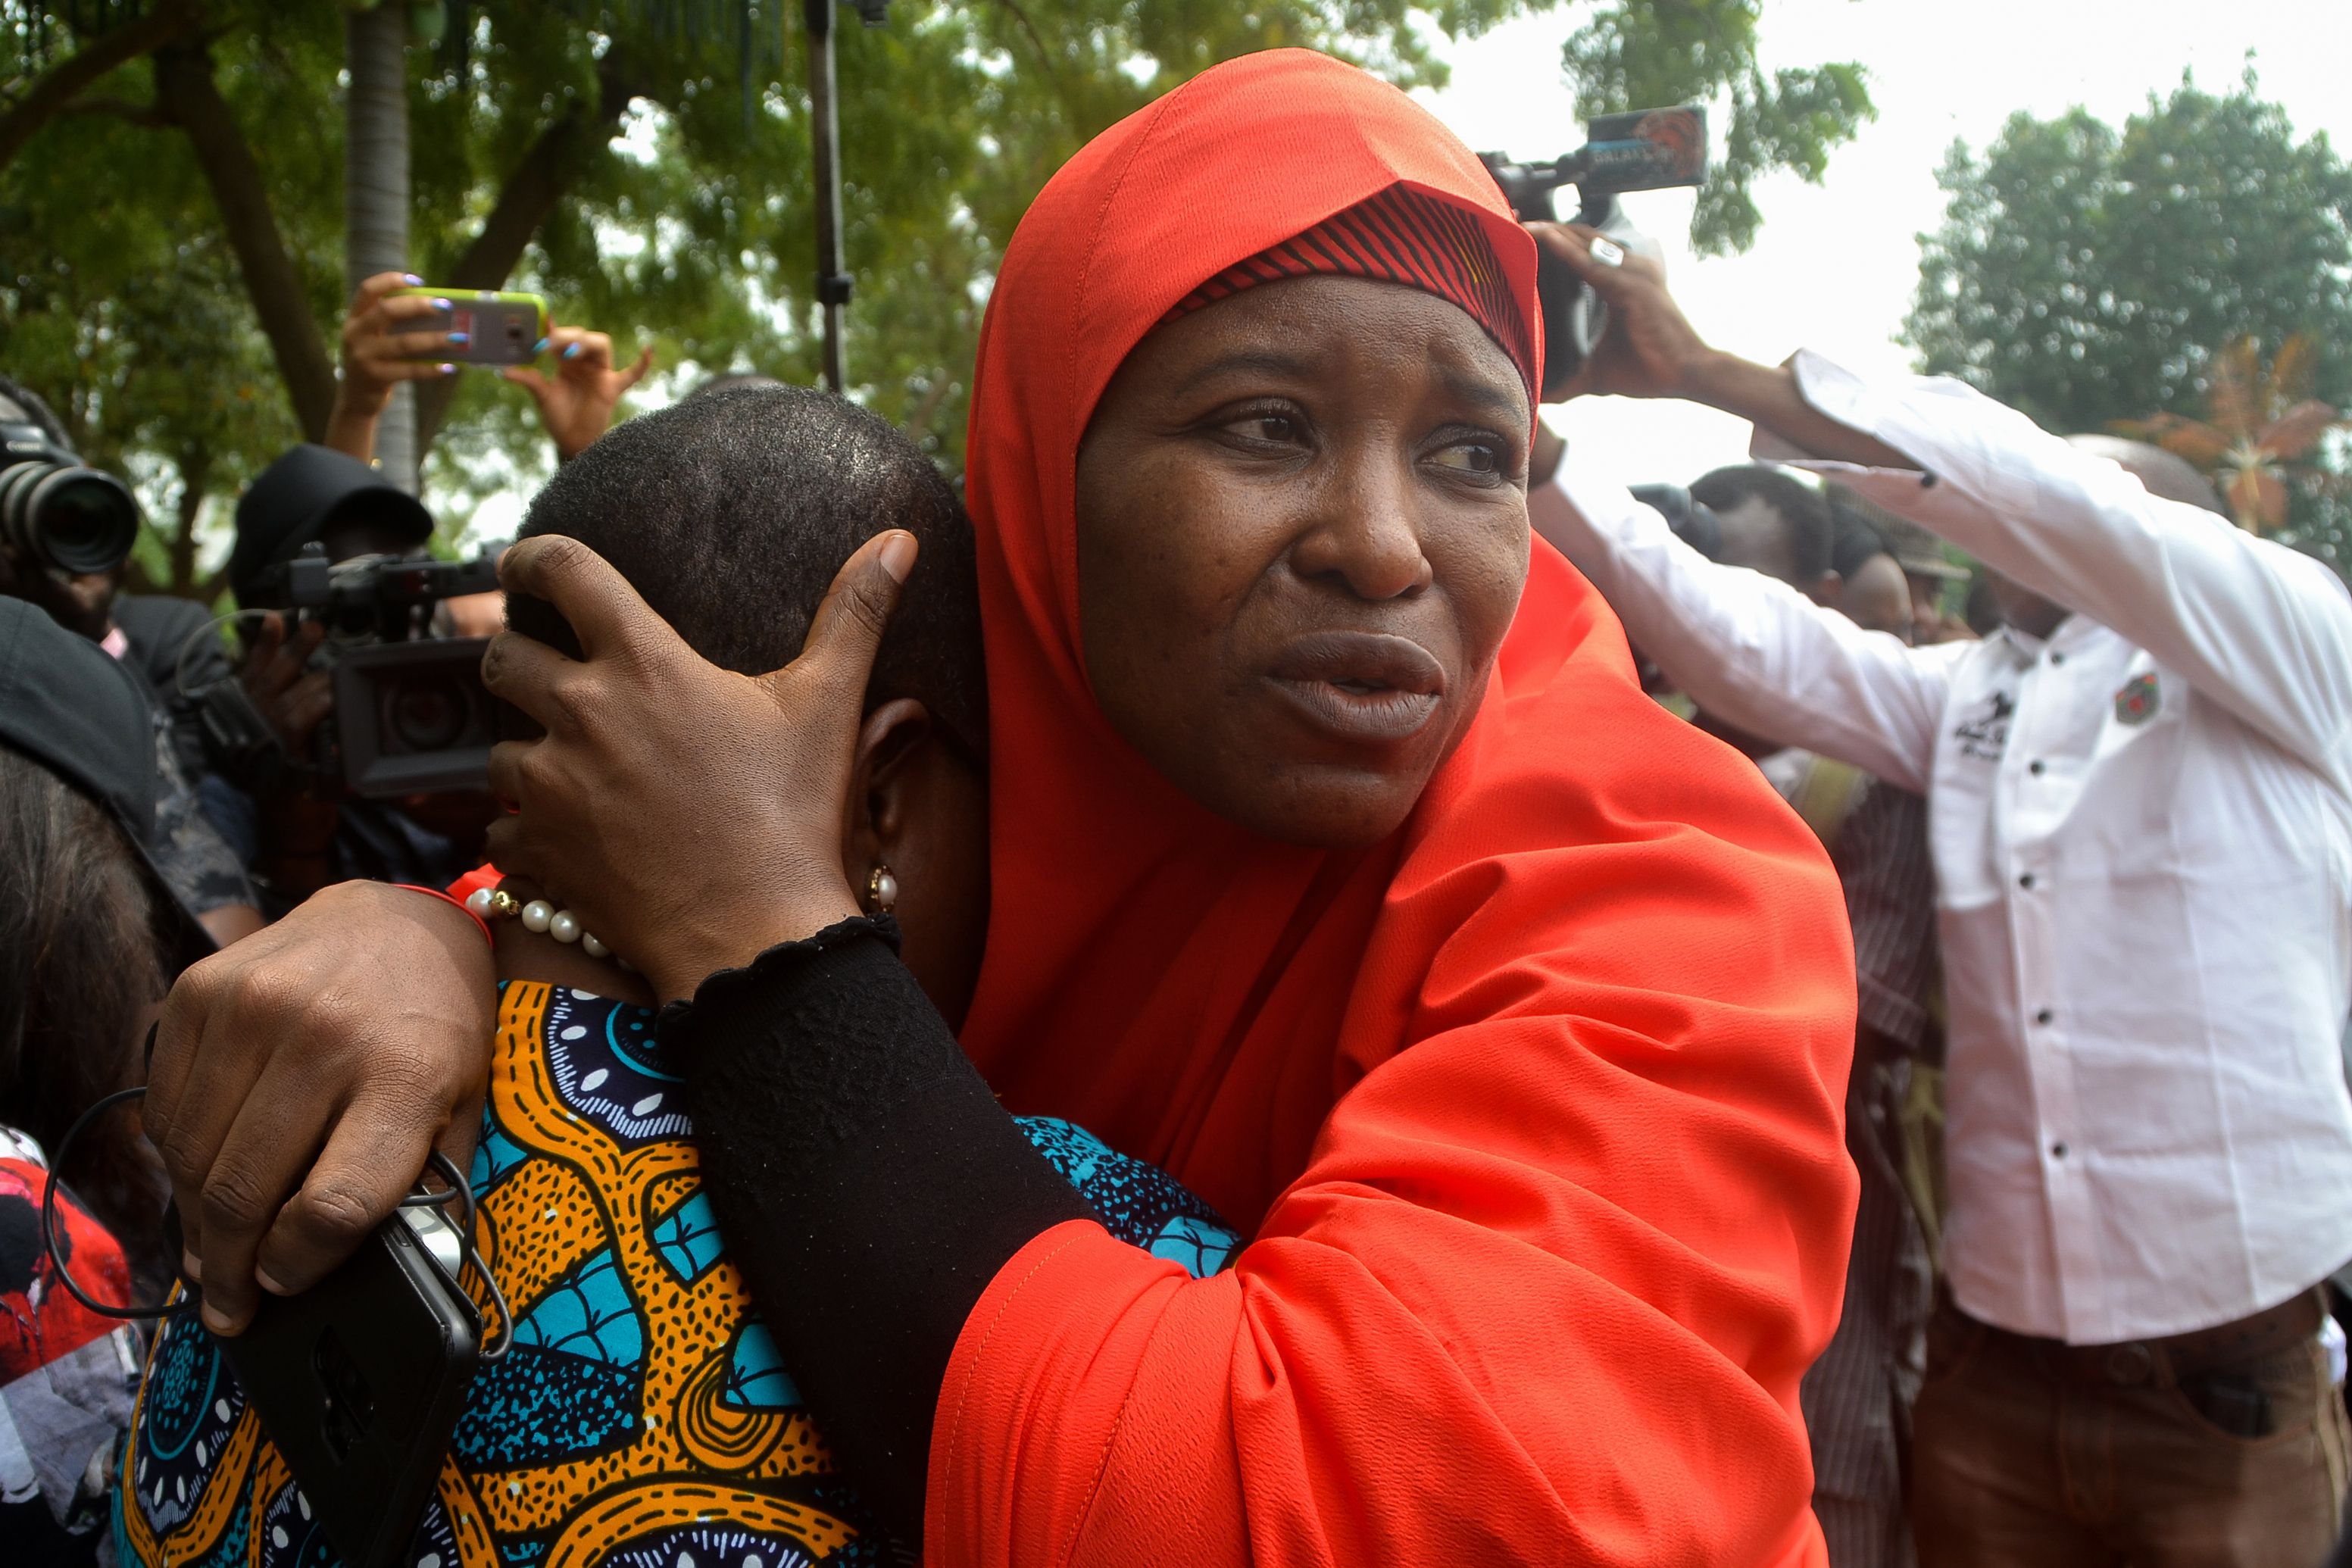 Founder of the Bring Back Our Girls (BBOG) advocacy group Oby Ezekwesili is comforted during a protest in Abuja, Nigeria on Oct. 16, 2018, following the killing of a kidnapped female Red Cross worker by Islamic State-allied Boko Haram jihadists. (Mudashiru Atanda—AFP/Getty Images)